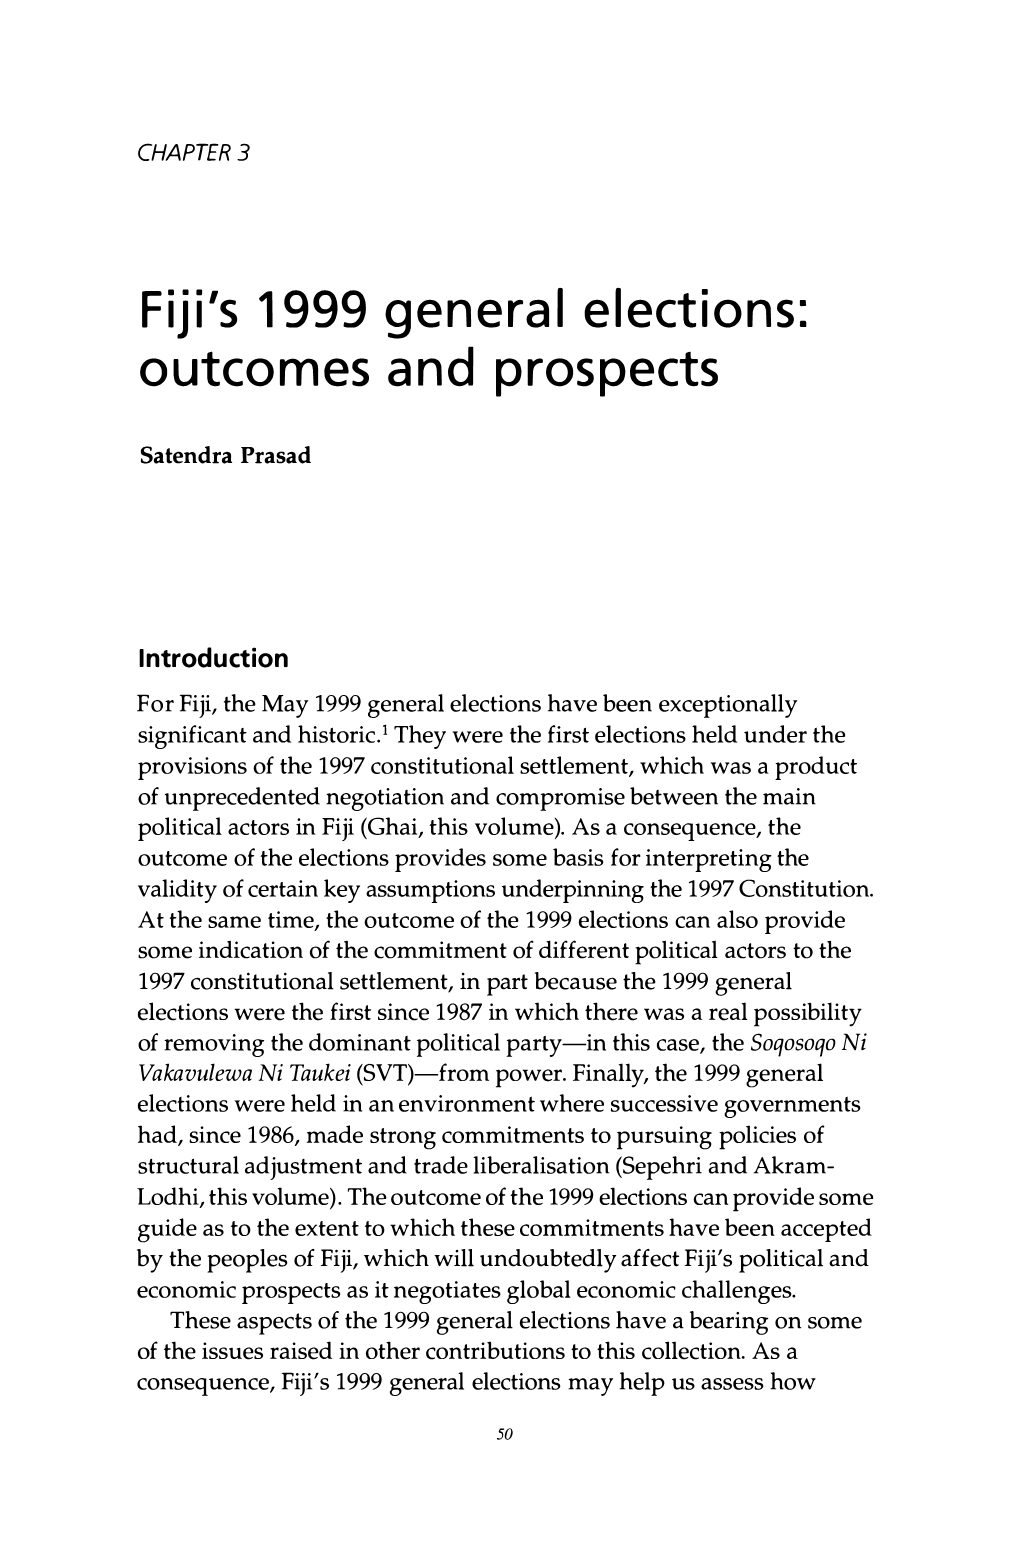 Fiji's 1999 General Elections: Outcomes and Prospects